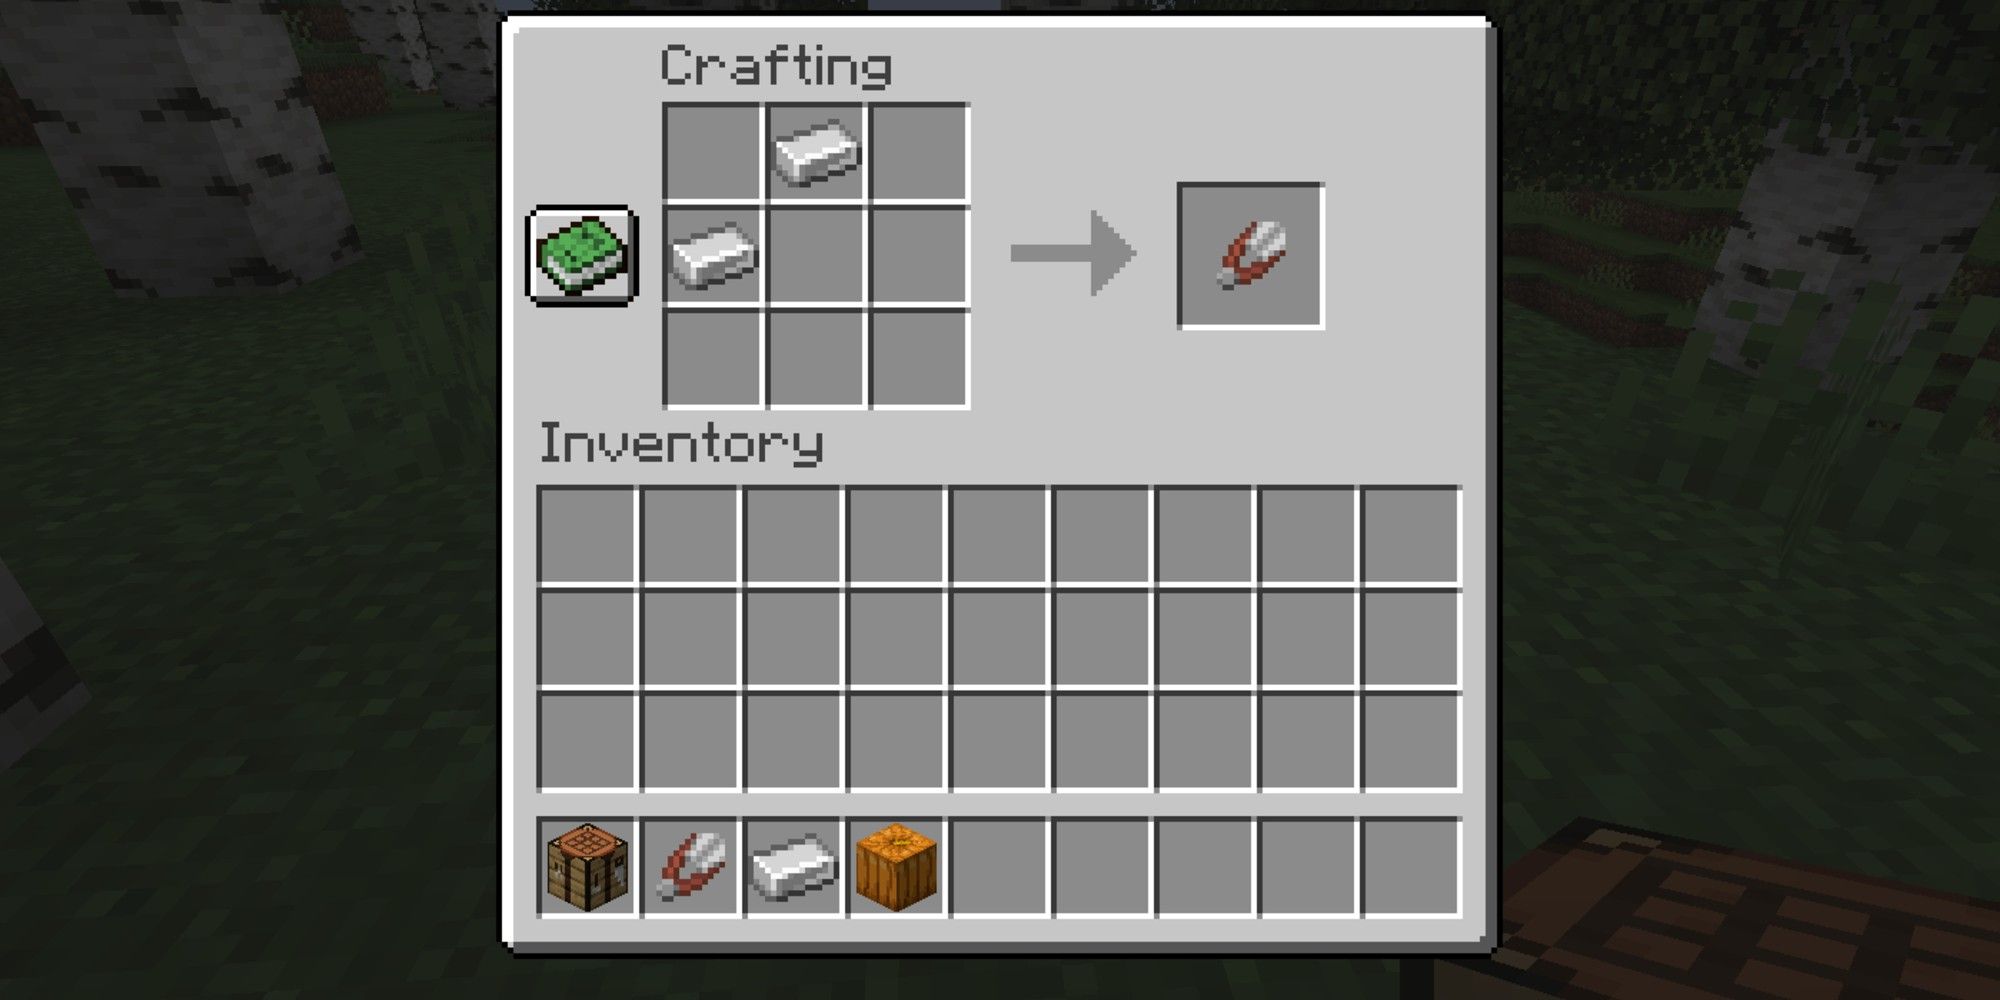 player crafting shears from the crafting menu with two iron bars